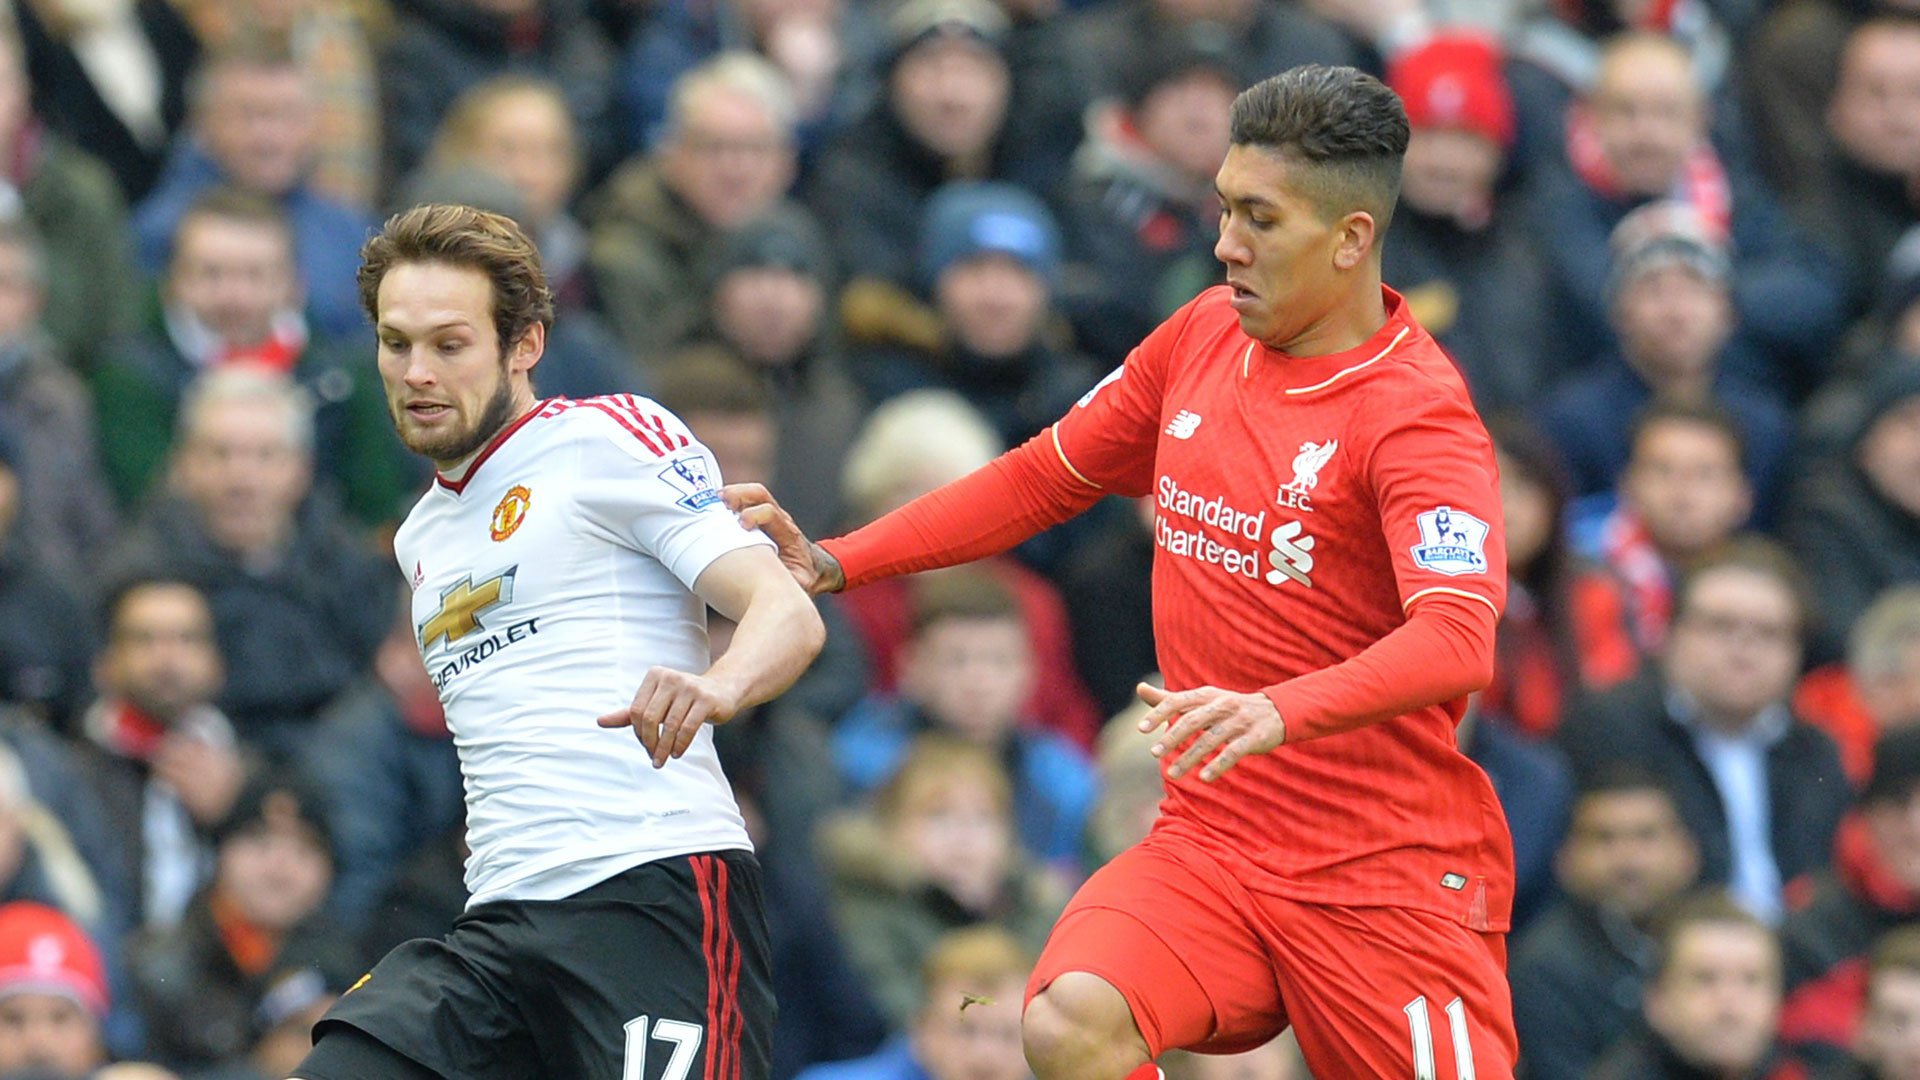 Daley Blind Roberto Firmino Liverpool Manchester United Premier League 17012016 - Goal.com